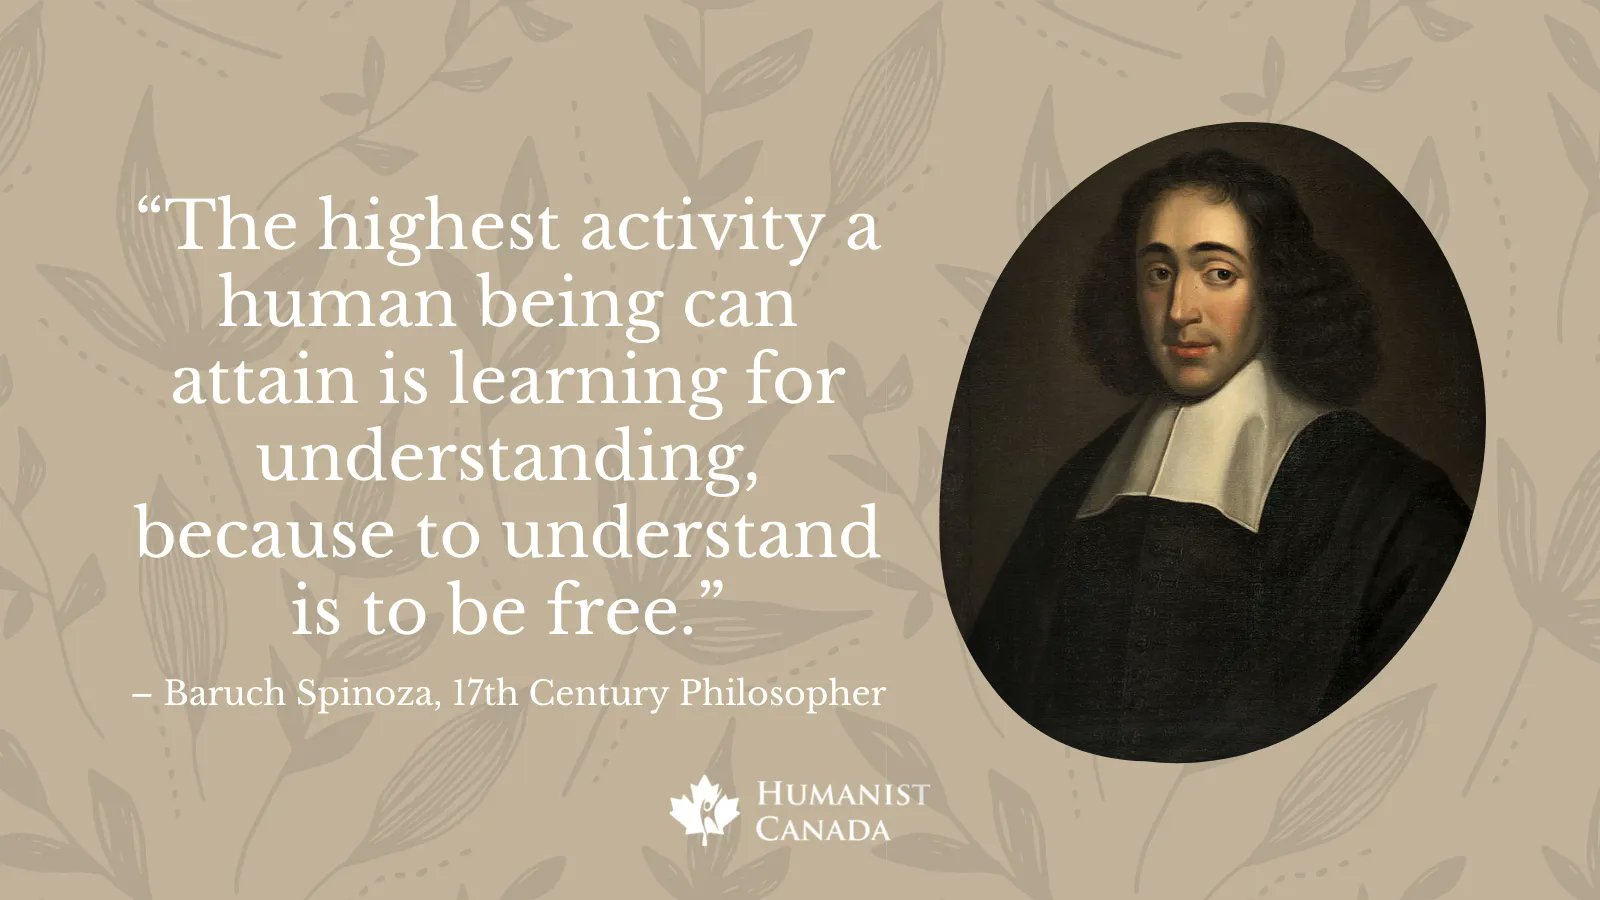 Humanist canada on baruch spinoza was a th century dutch philosopher and one of the most important thinkers of the enlightenment spinoza was an early proponent of rationalism wrote extensively on